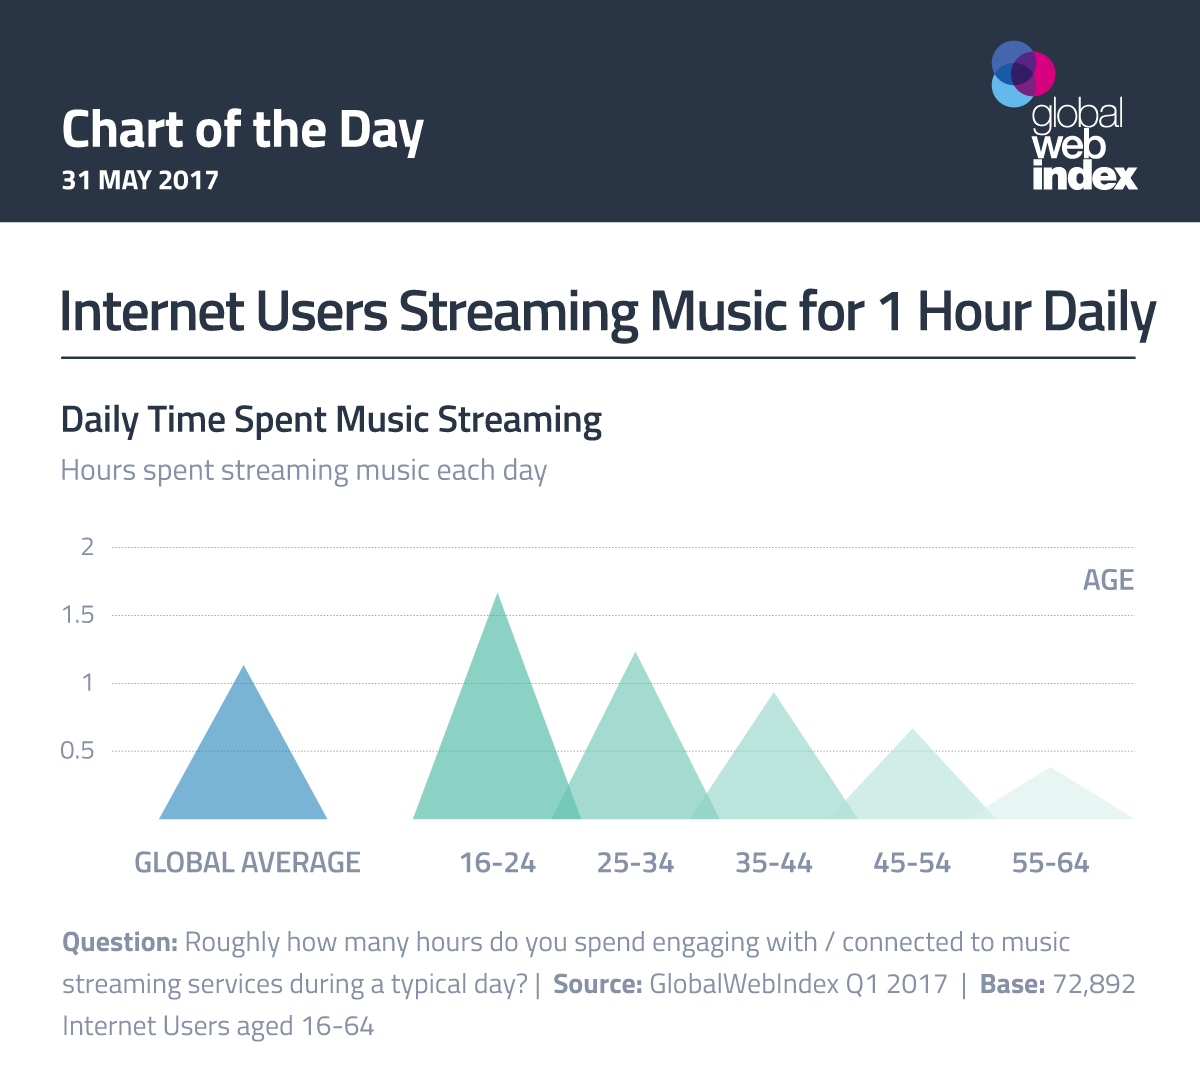 Internet Users Streaming Music for 1 Hour Daily